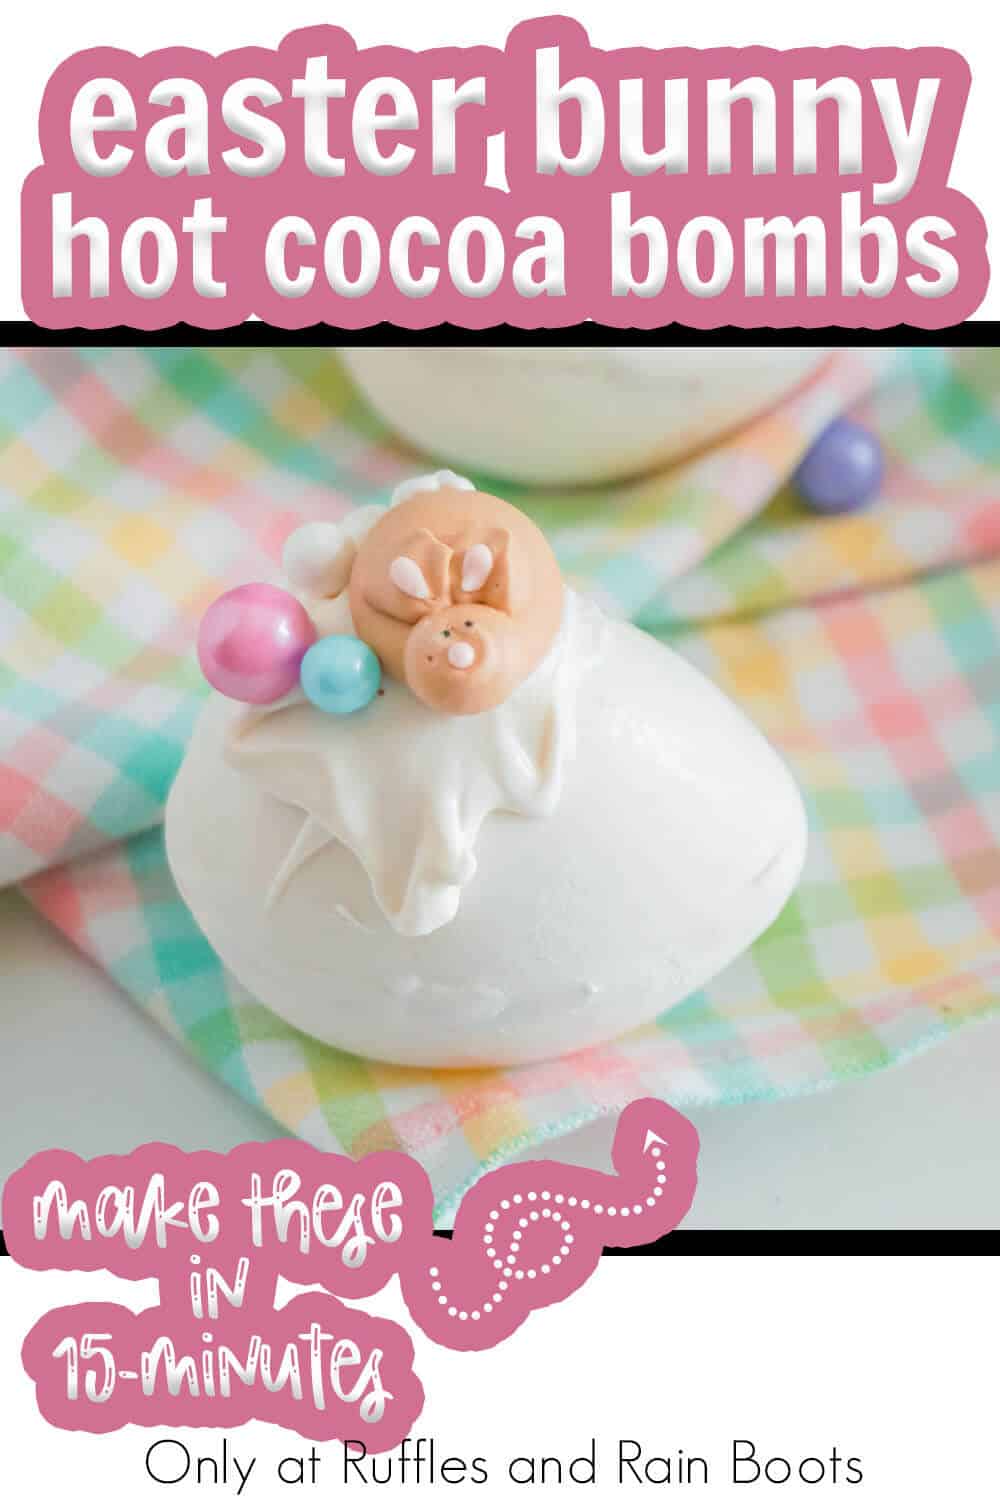 hot cocoa bombs with a bunny on top with text which reads easter bunny hot cocoa bombs make these in 15-minutes